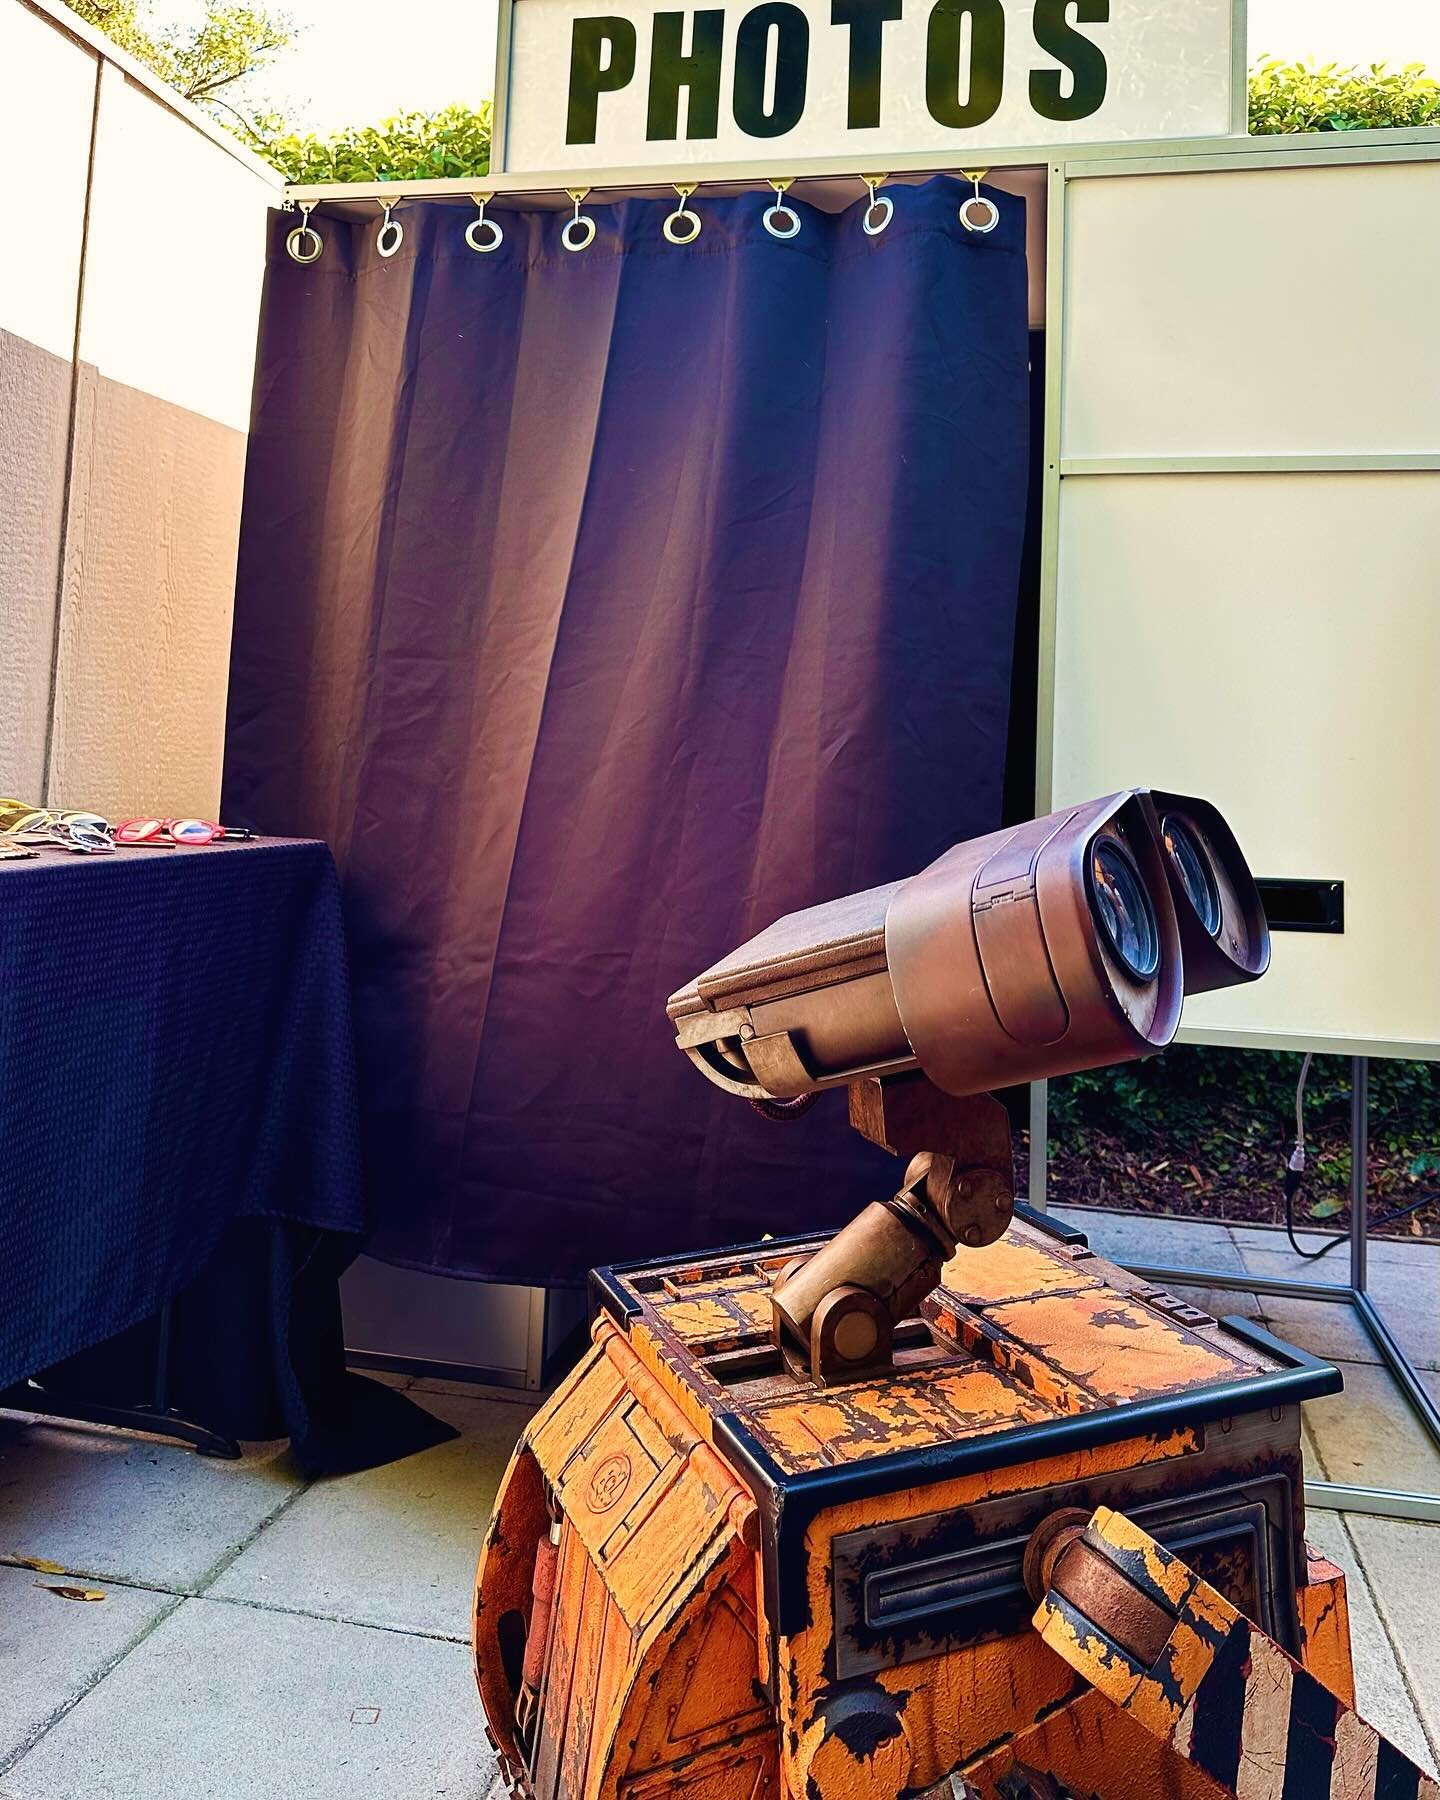 Late Post&hellip;another great annual event for CSULB&rsquo;s Green Generation Showcase. Great way to kick off Earth Day!!! Even WALLE stopped by the booth!
.
.
.
.

.

#lbphotobooth #photobooth #photos #weddings #love #events #props #lbc #longbeach 